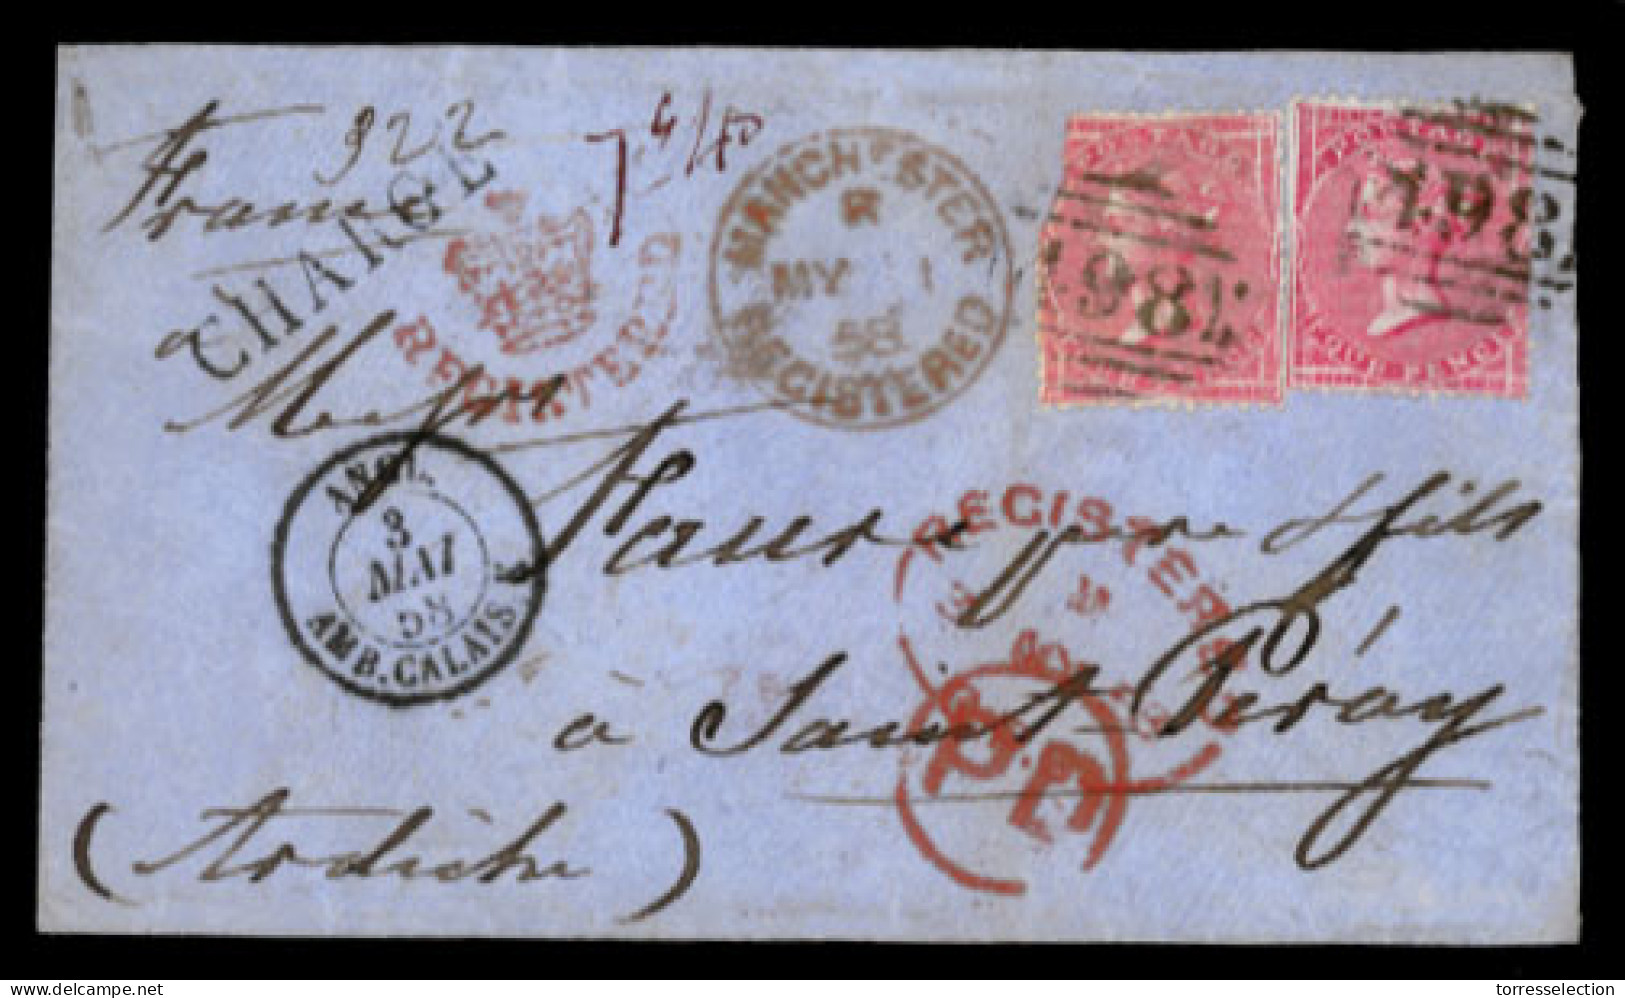 GREAT BRITAIN. 1858. (May 1) Manchester To Saint Peray. Small Registered Blue Envelope Bearing 4d Rose X2, 3 Shades, One - ...-1840 Voorlopers